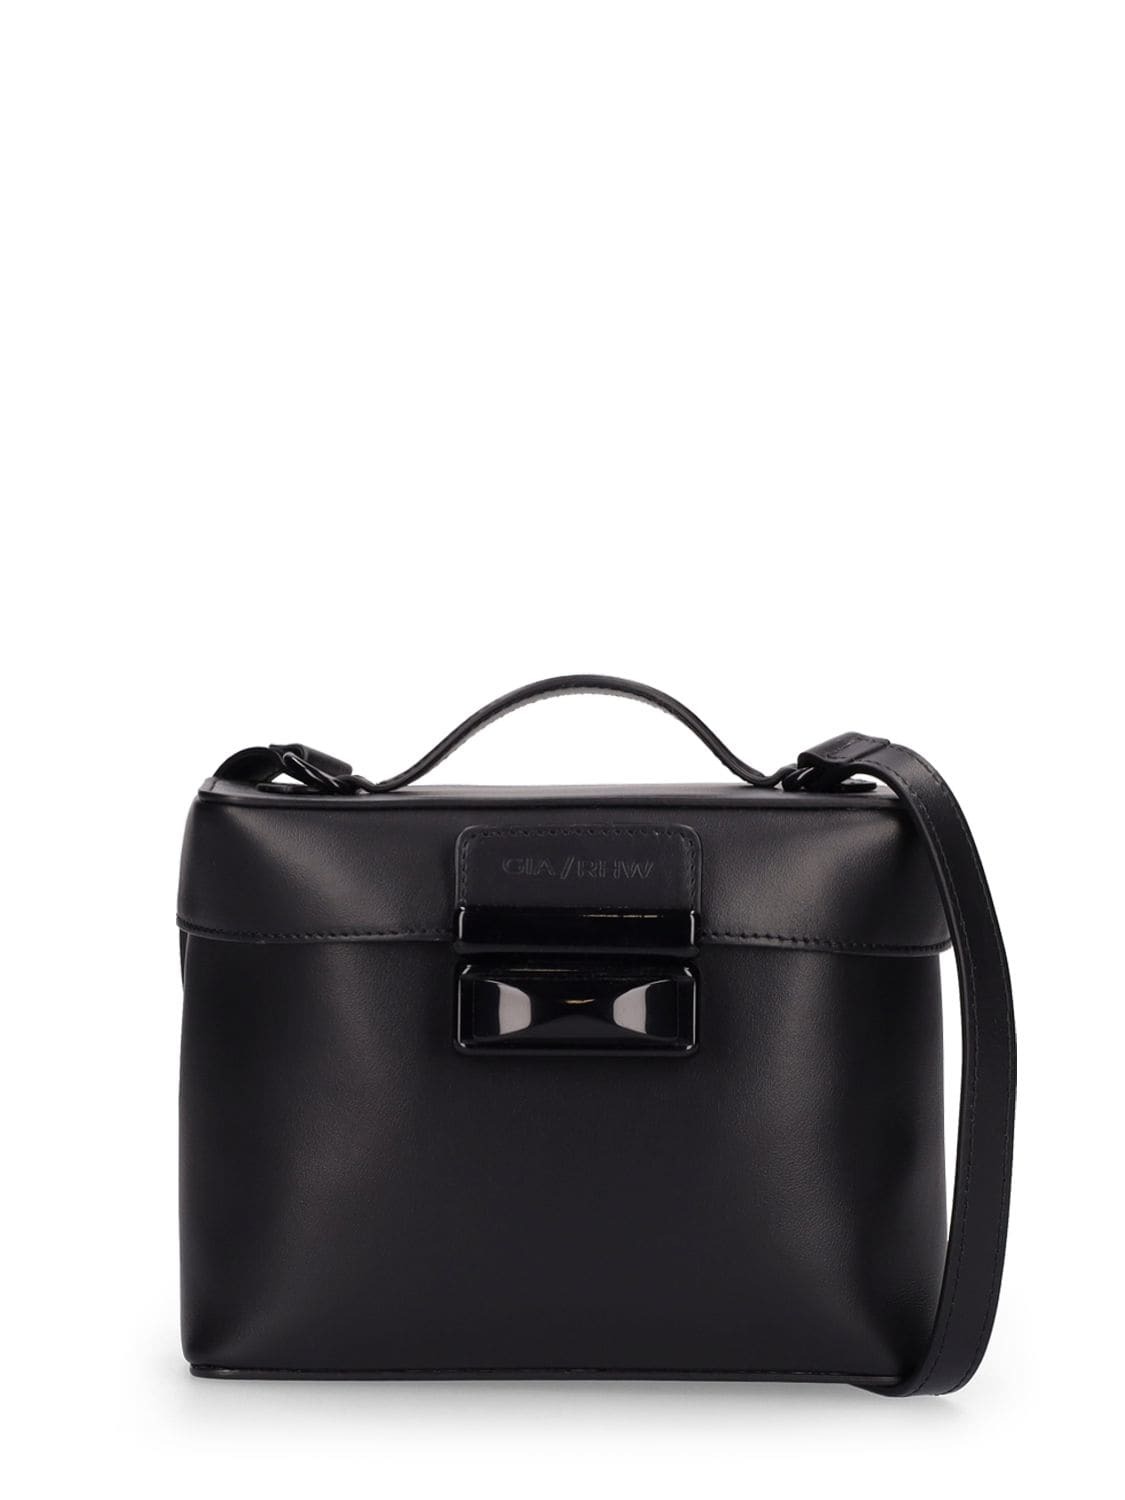 GIA X RHW Small Leather Top Handle Bag in black